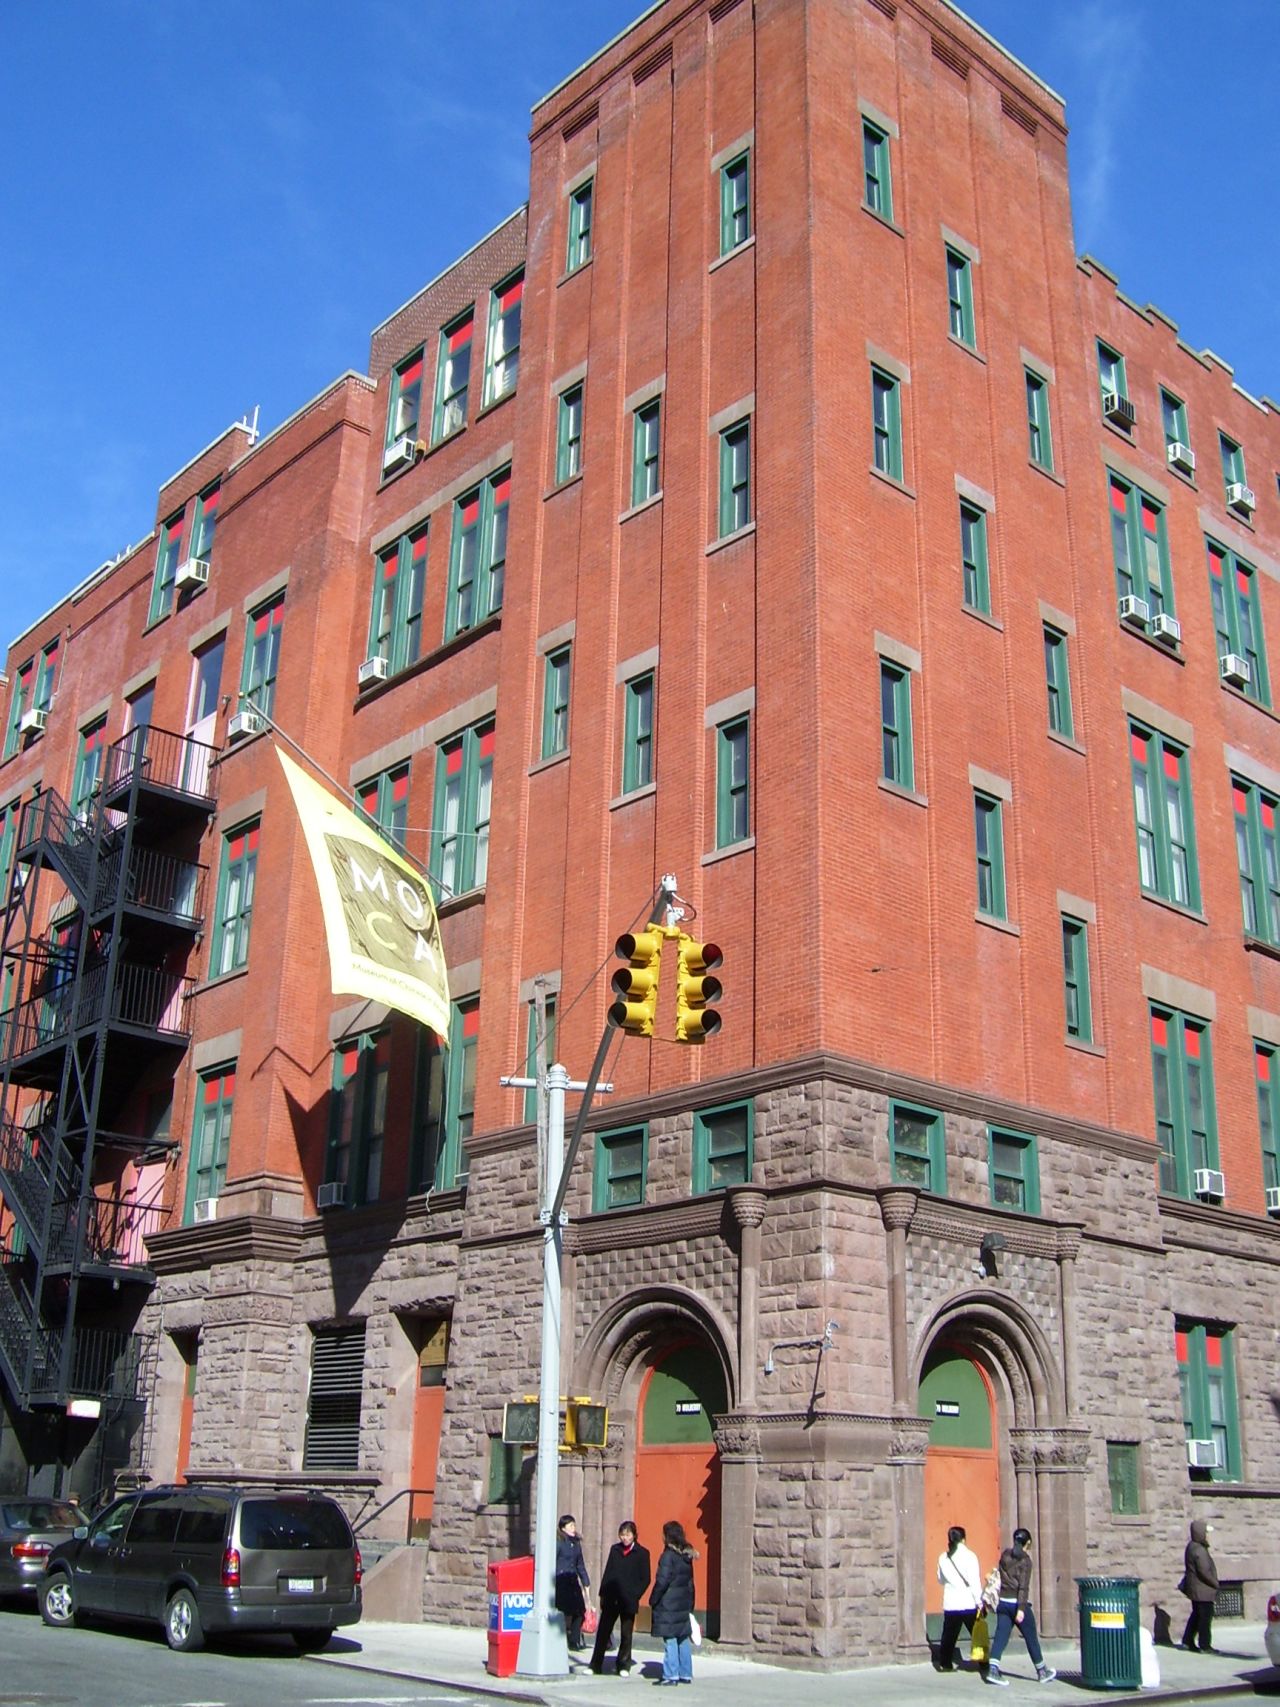 The vast majority of MOCA's 85,000-item archive was kept on the second floor of this building in Manhattan's Chinatown. 